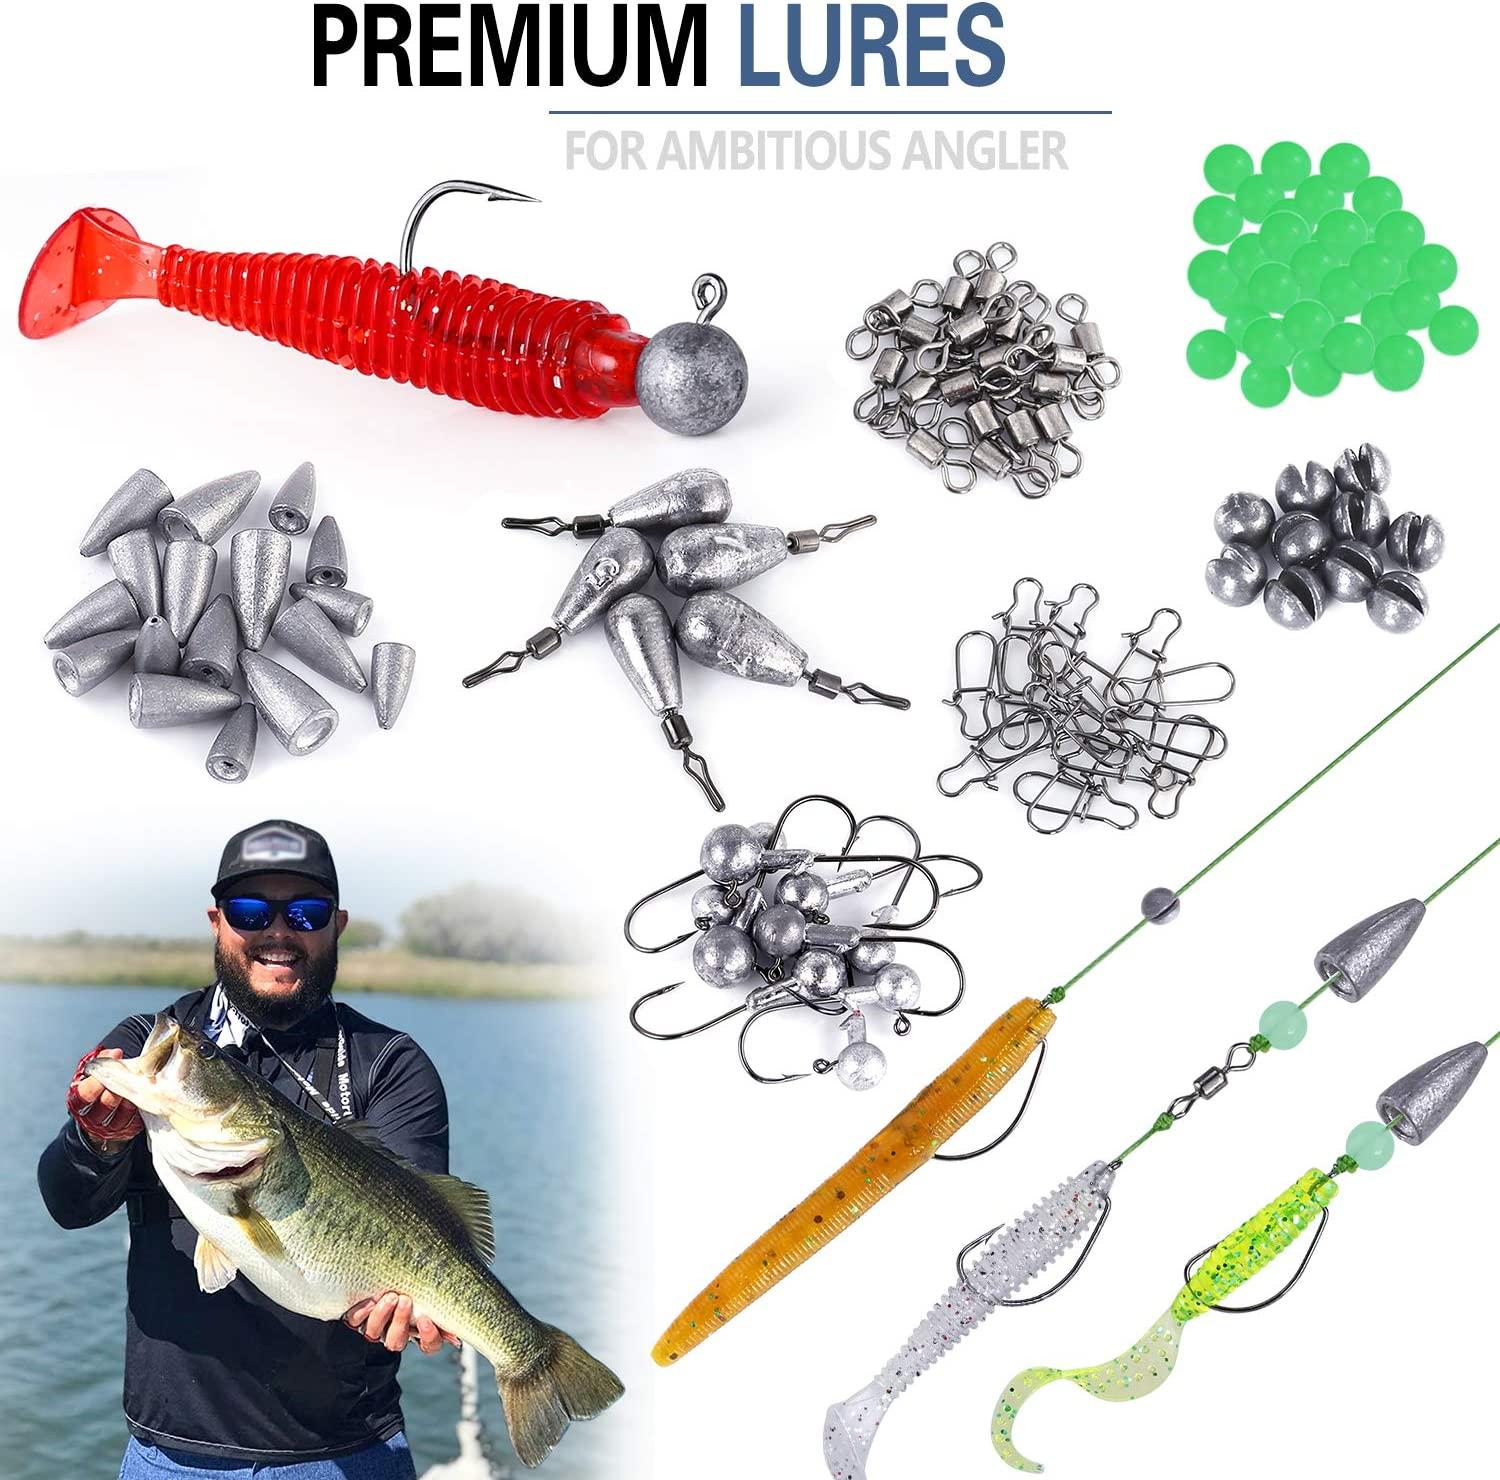 PLUSINNO Fishing Lures Baits Tackle Including Crankbaits, Spinnerbaits,  Plastic Worms, Jigs, Topwater Lures , Tackle Box and More Fishing Gear  Lures Kit Set, 102/67/27Pcs Fishing Lure Tackle 302Pcs Fishing Lures Kit